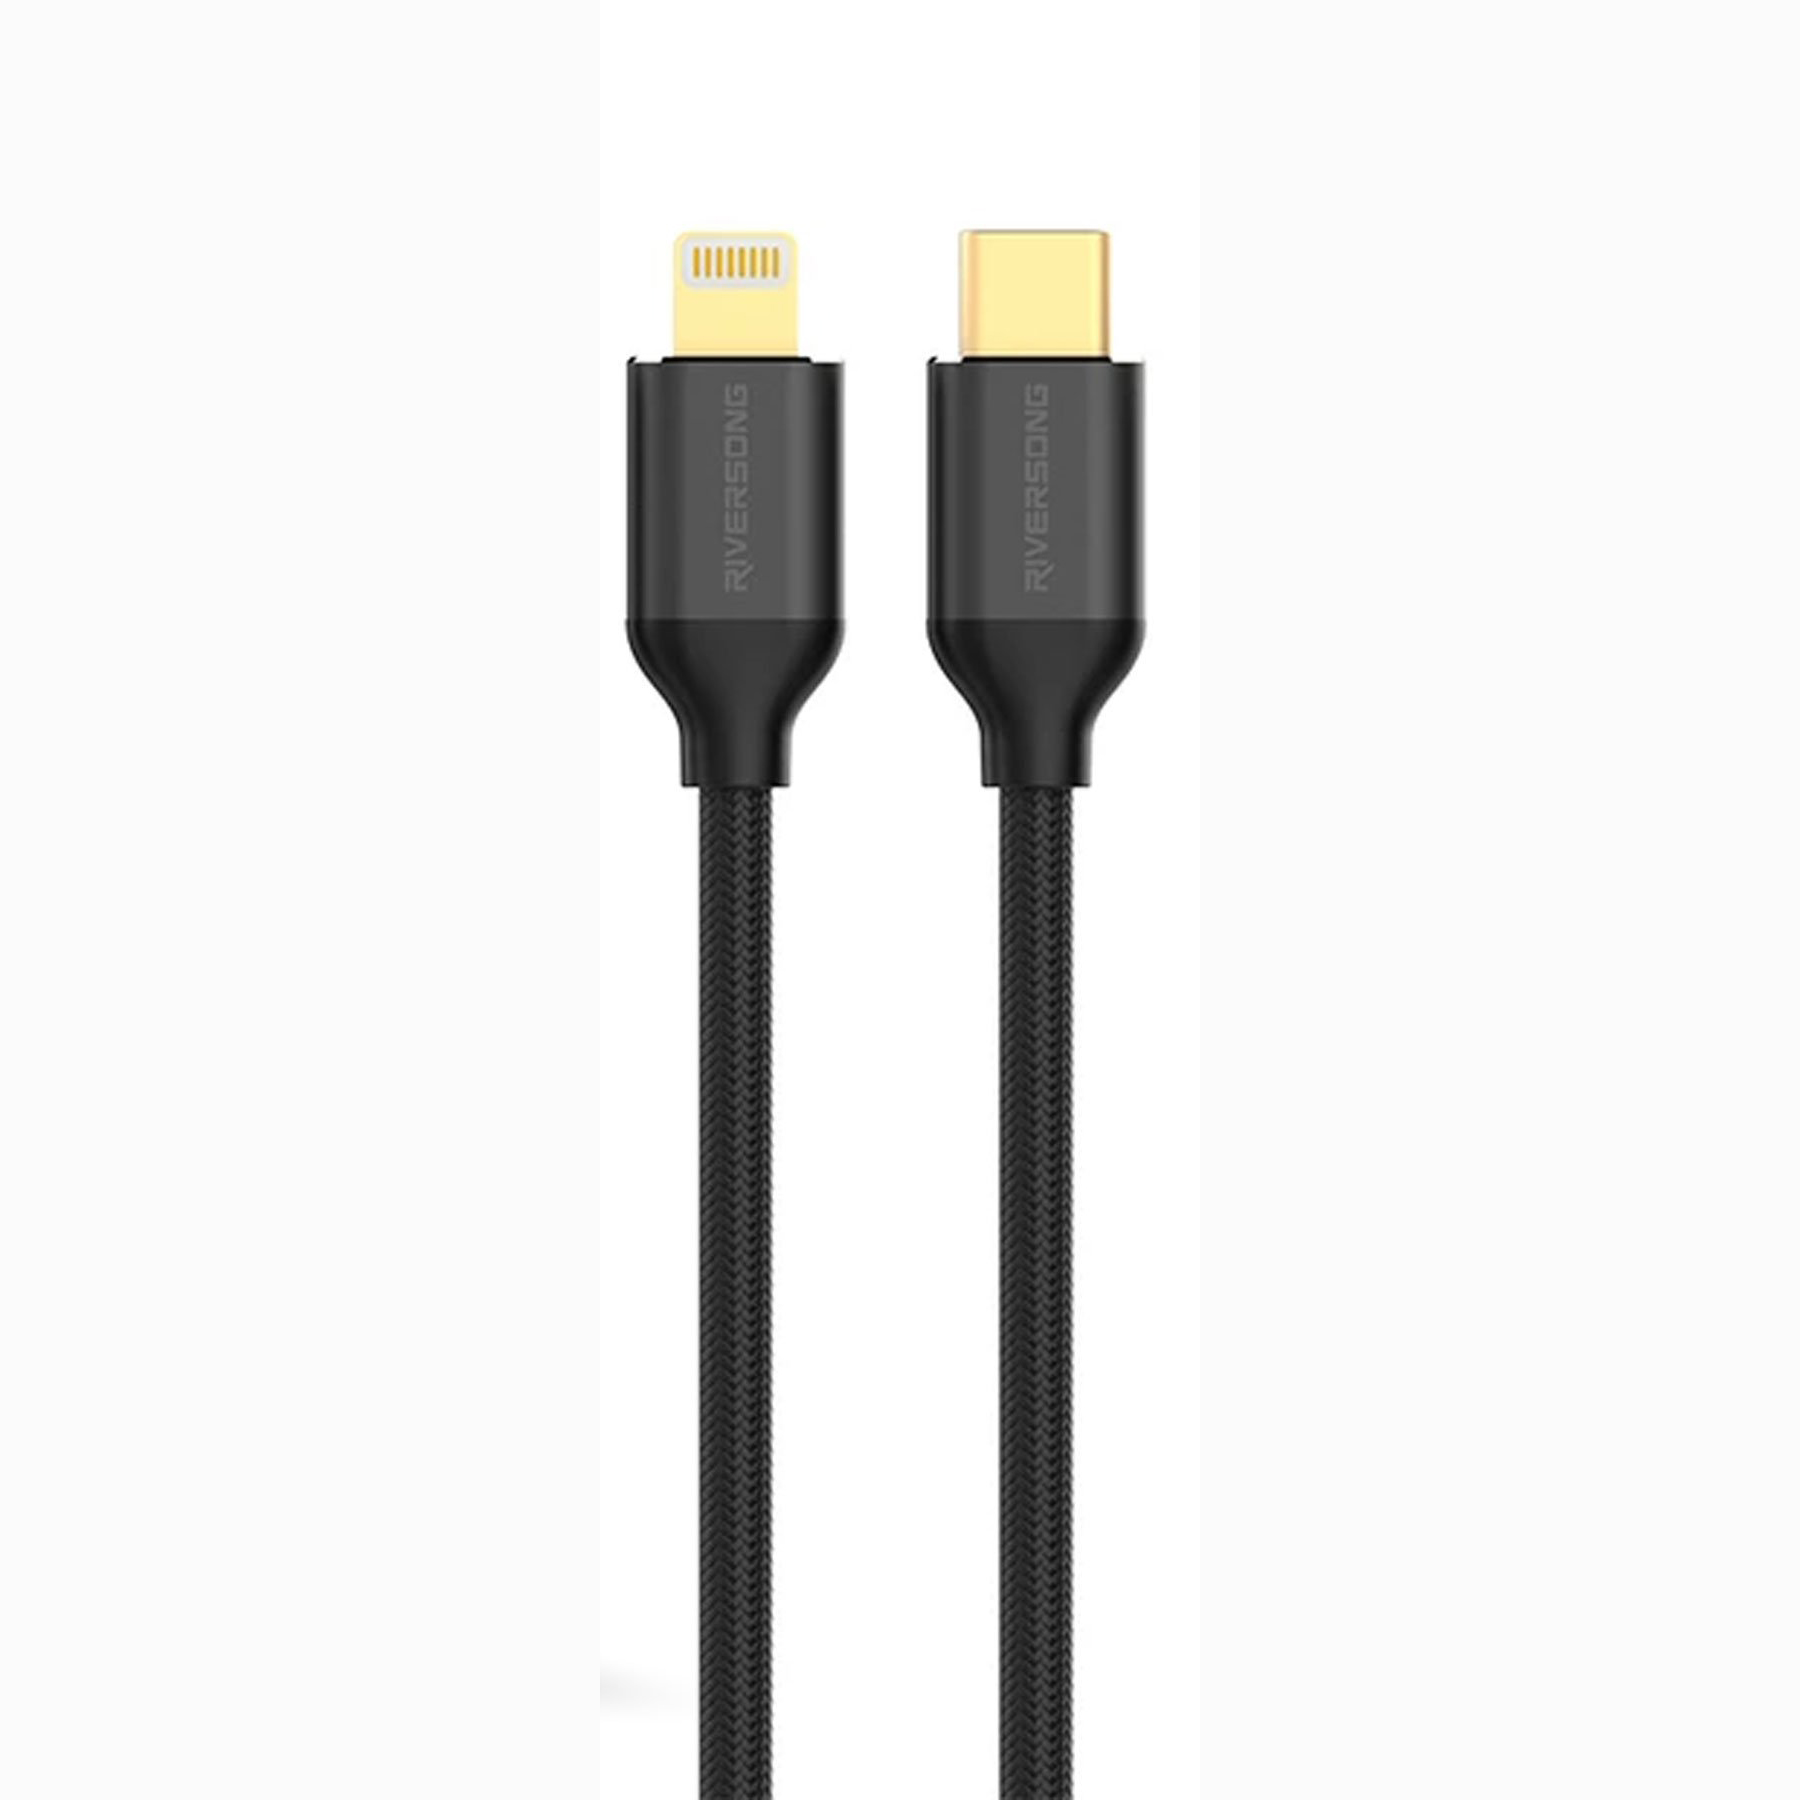 CABLE TYPE-C TO Lightning FOR IPHONE & IPAD DATA & CHARGE RIVERSONG 2.4A CL47 تايب سي الى ايفون, Other Smartphone Acc